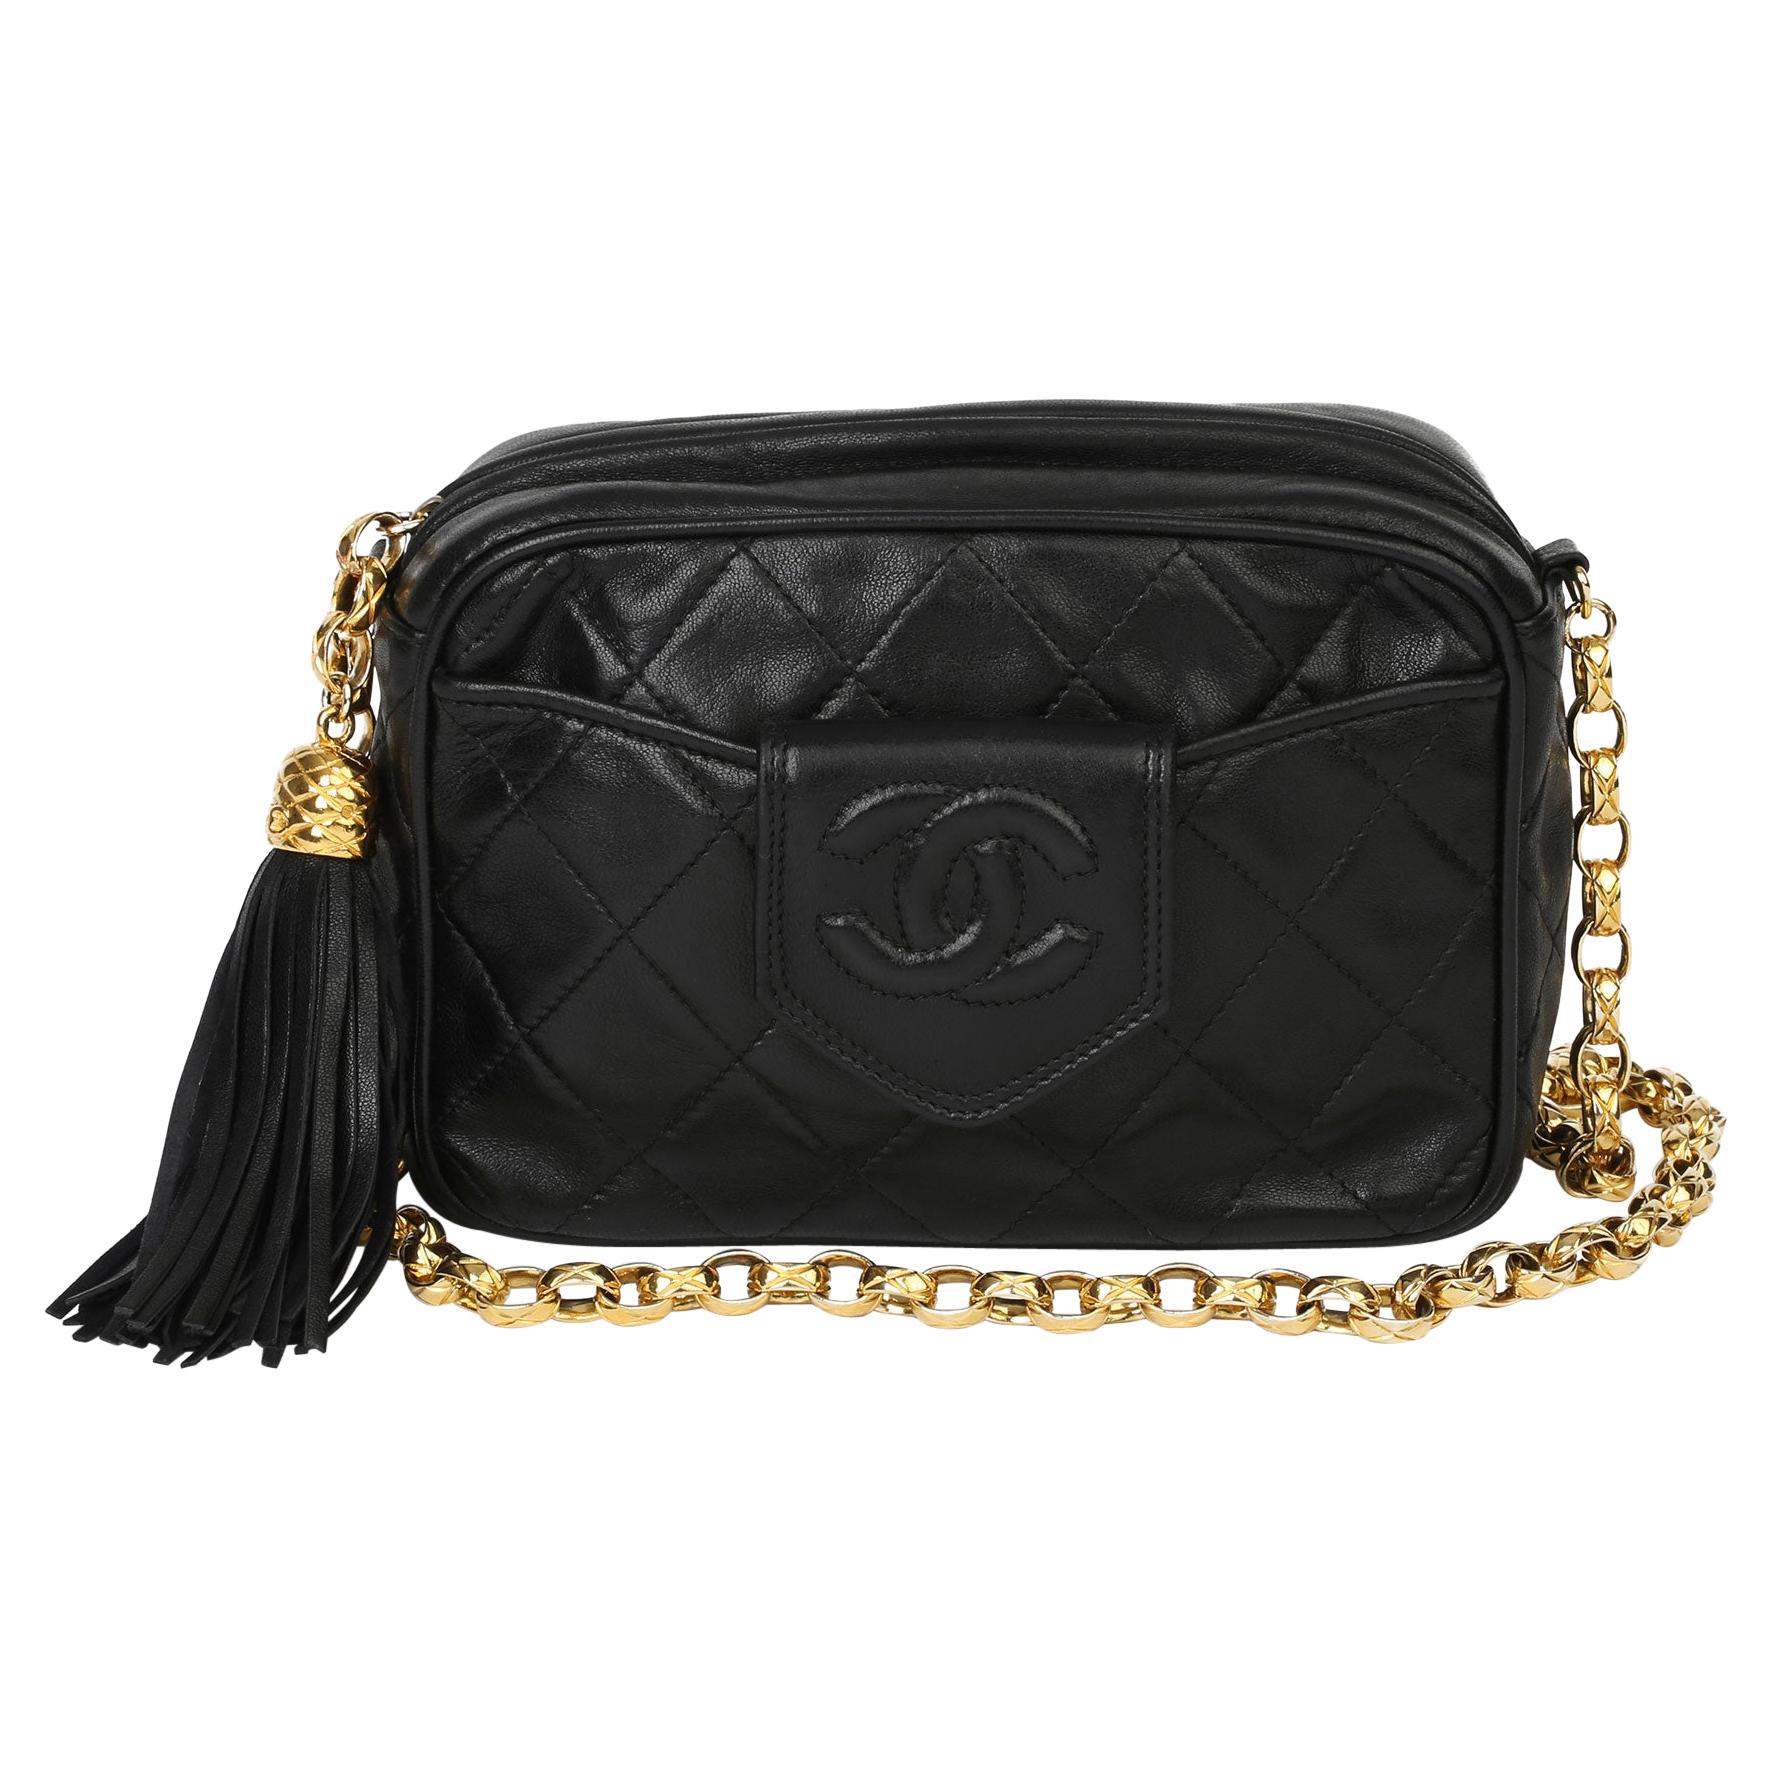 Chanel Vintage 80's Micro Mini Metallic Gold Quilted Lambskin Flap Bag